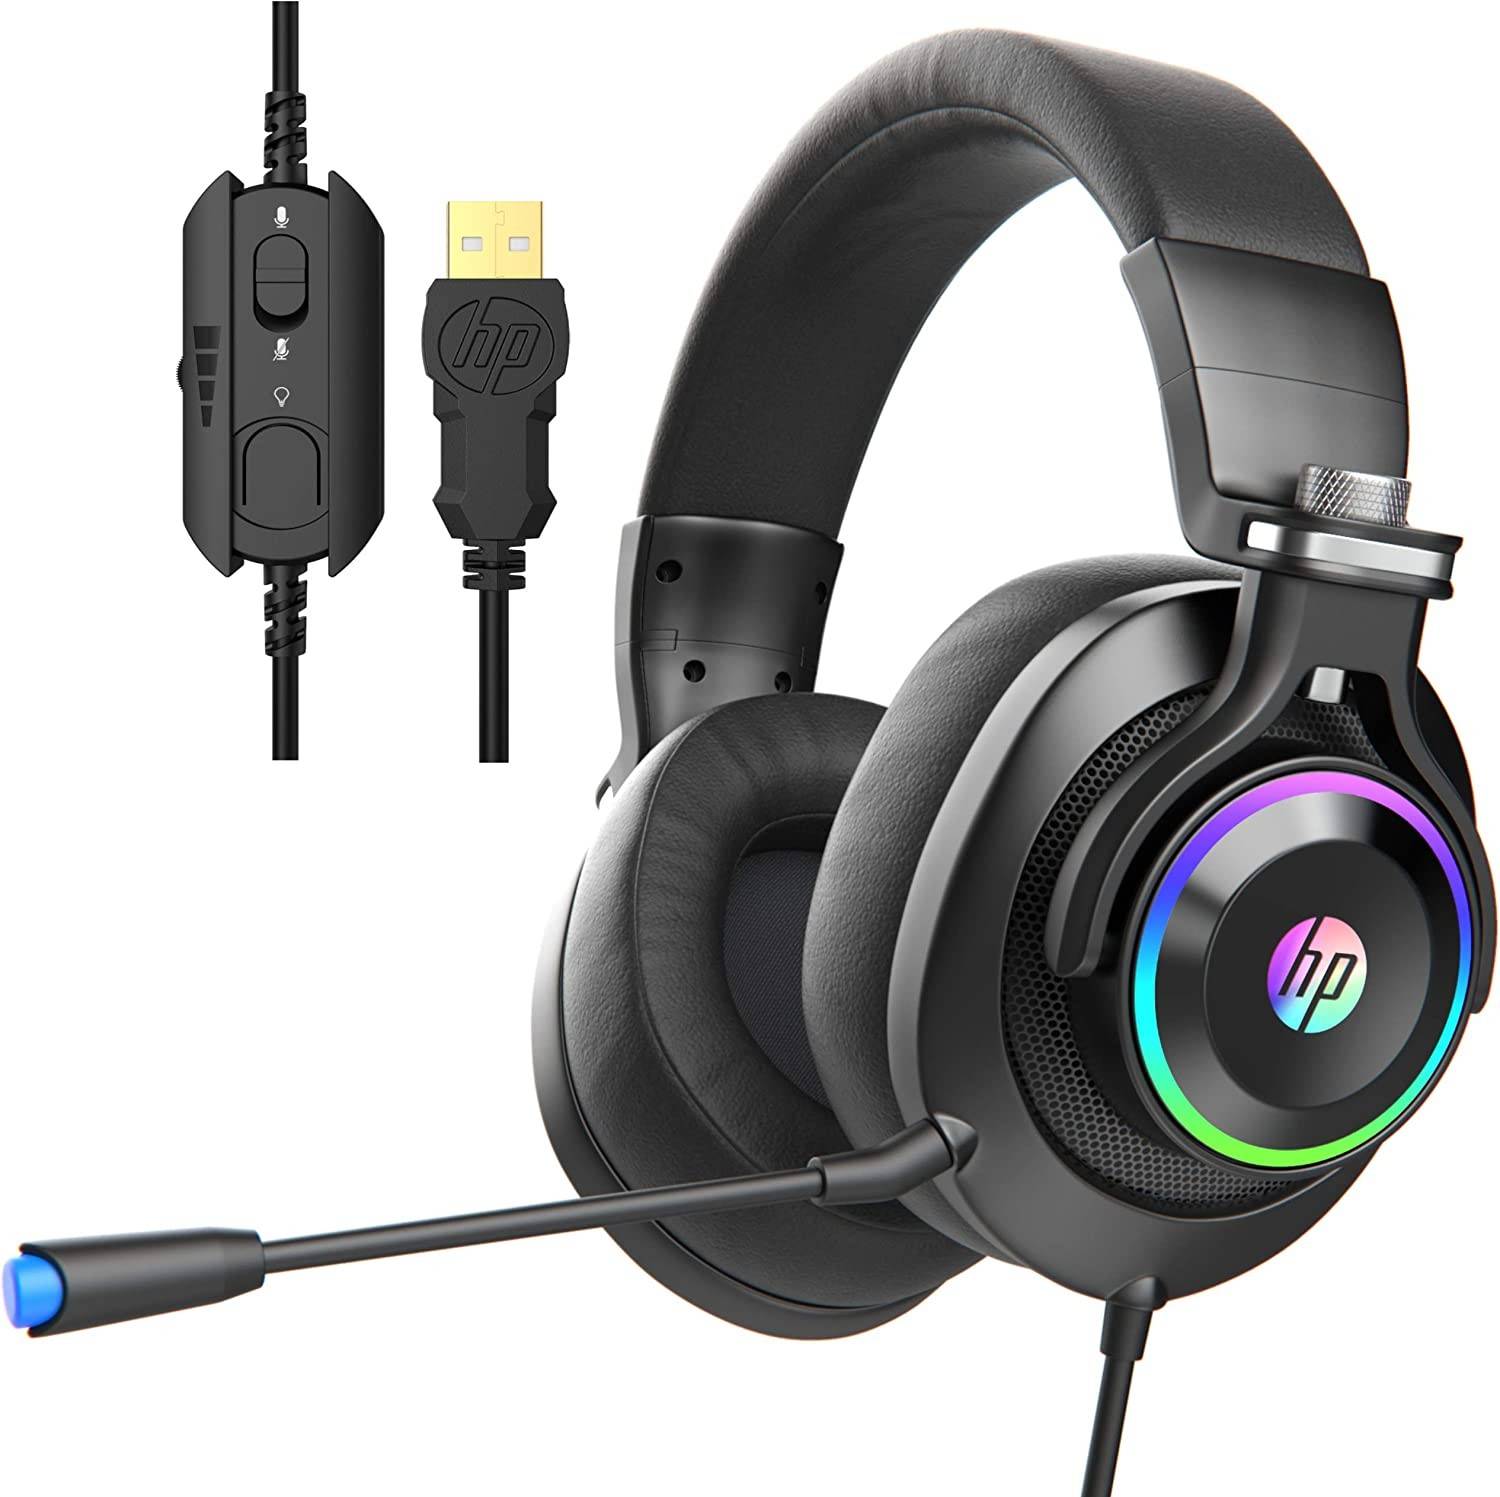 HP USB PC Gaming Headset with Microphone